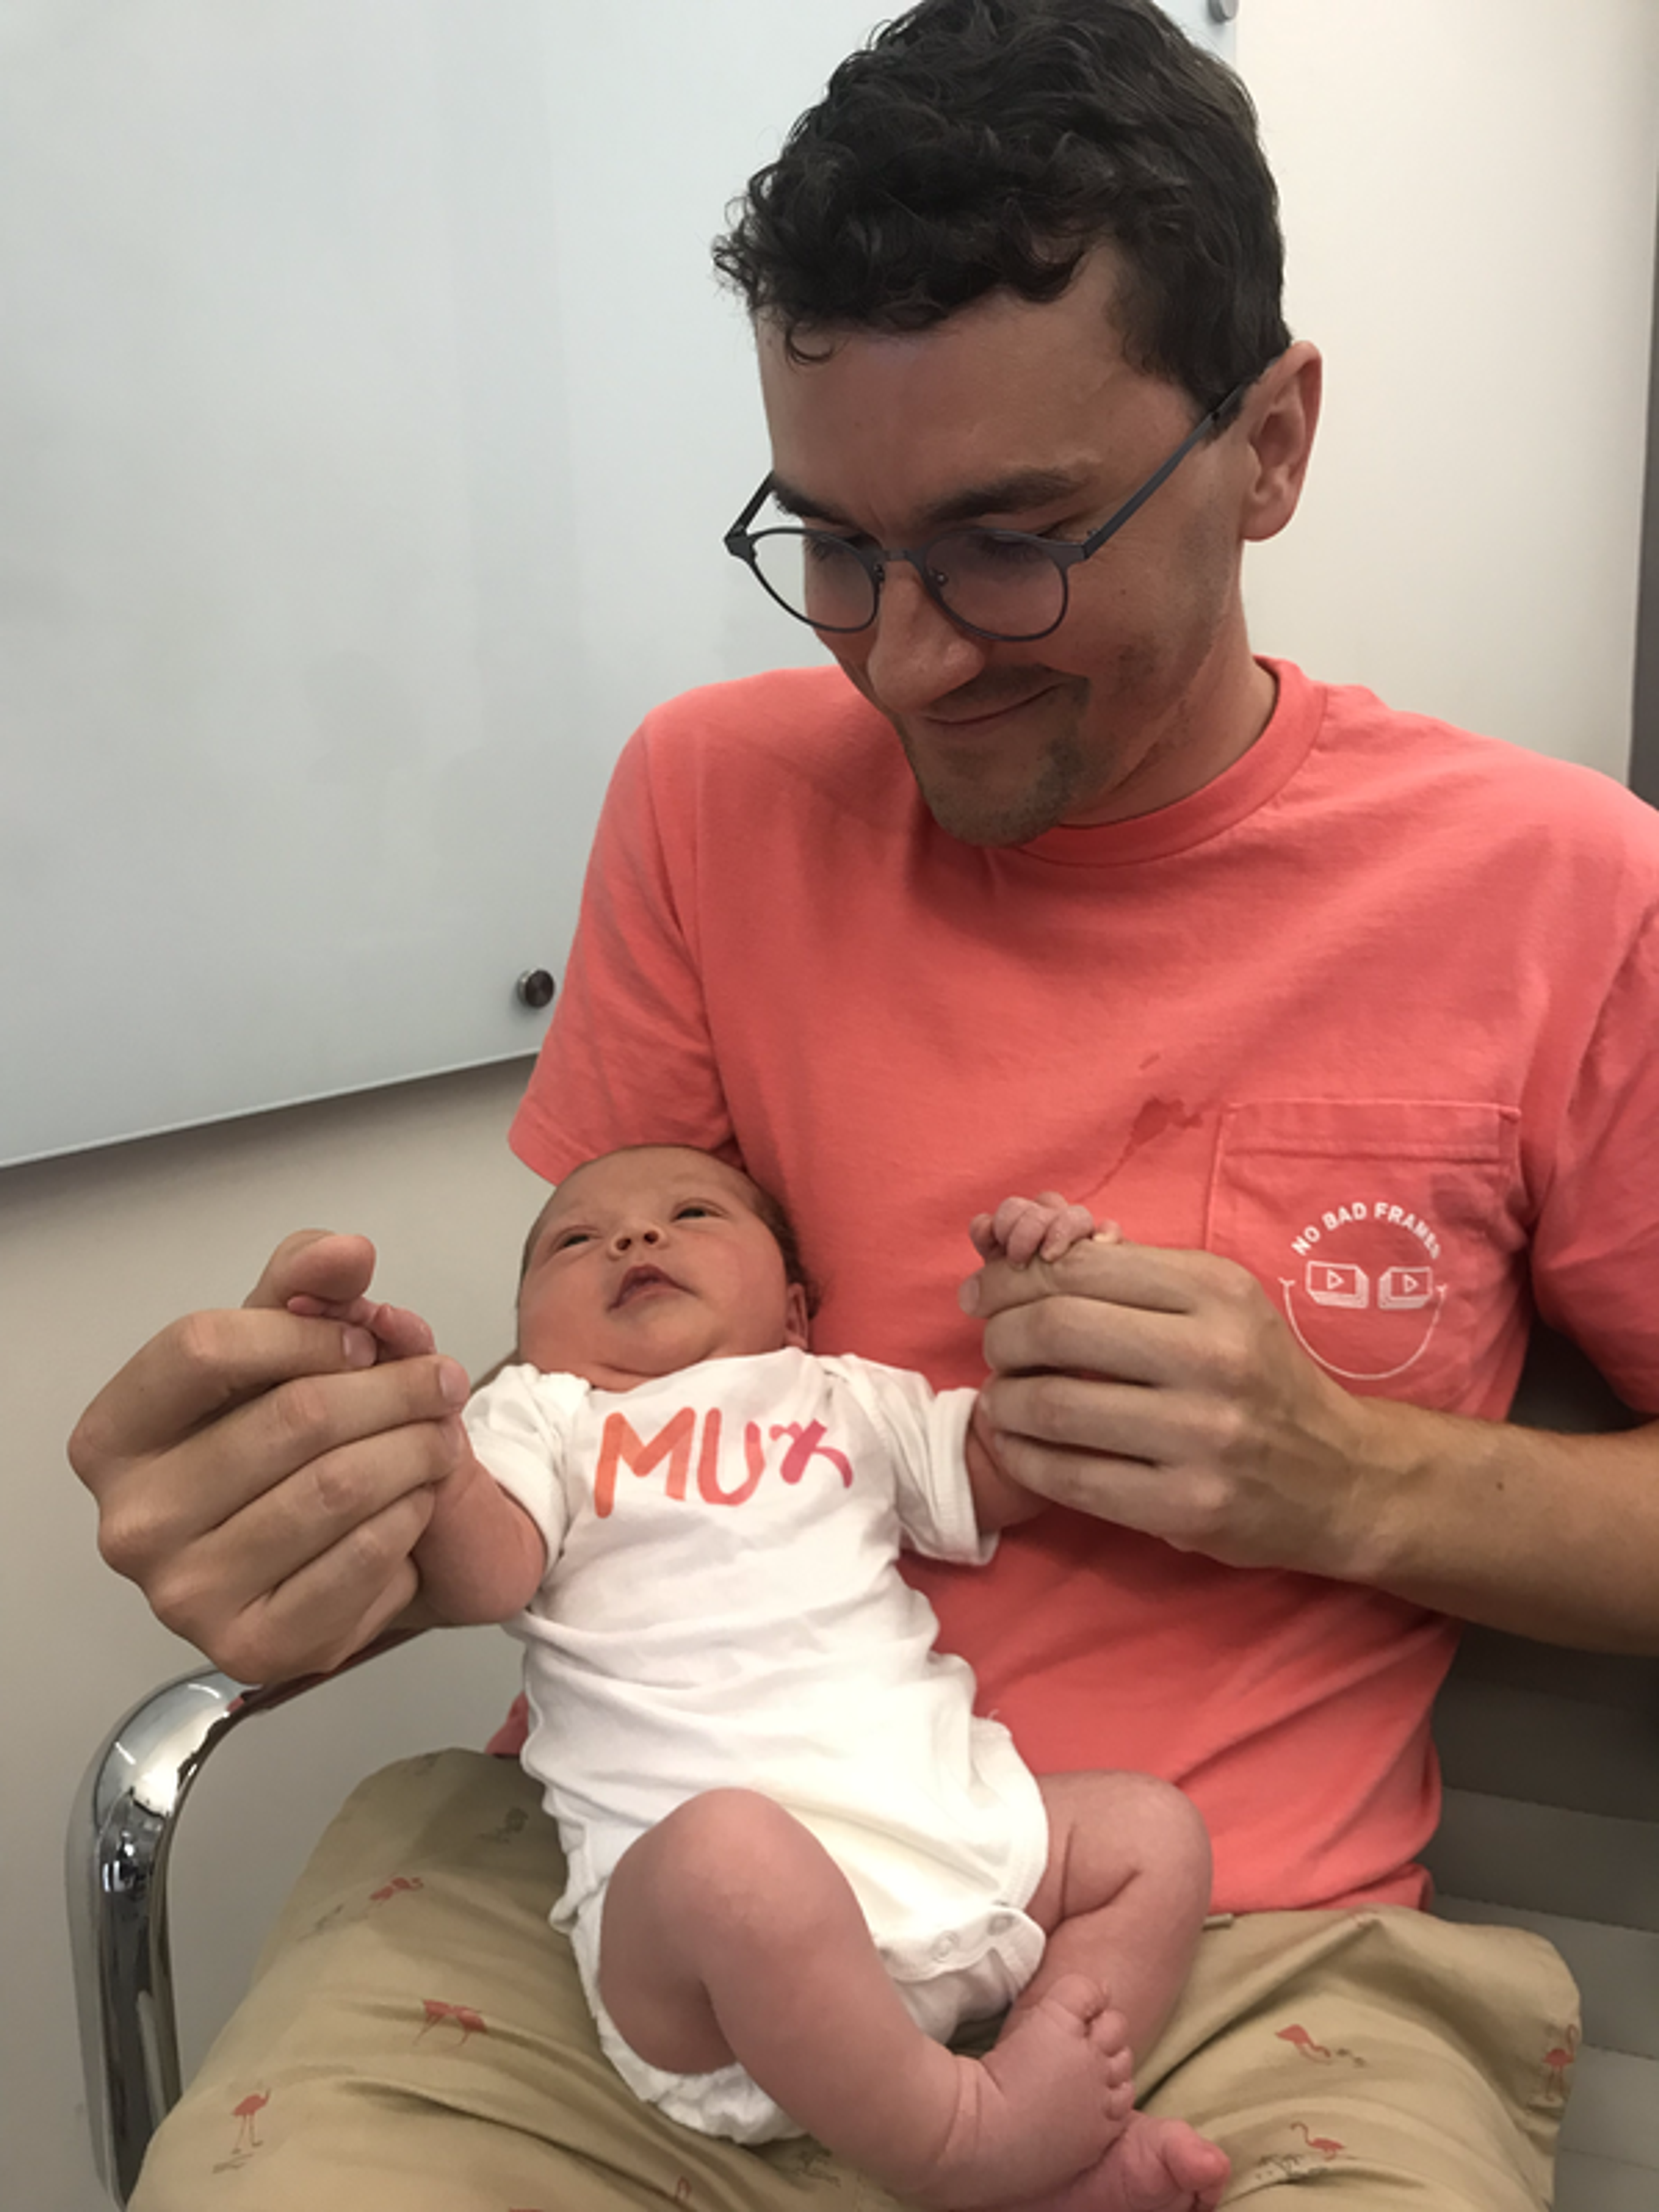 Image of a baby in Mux clothing